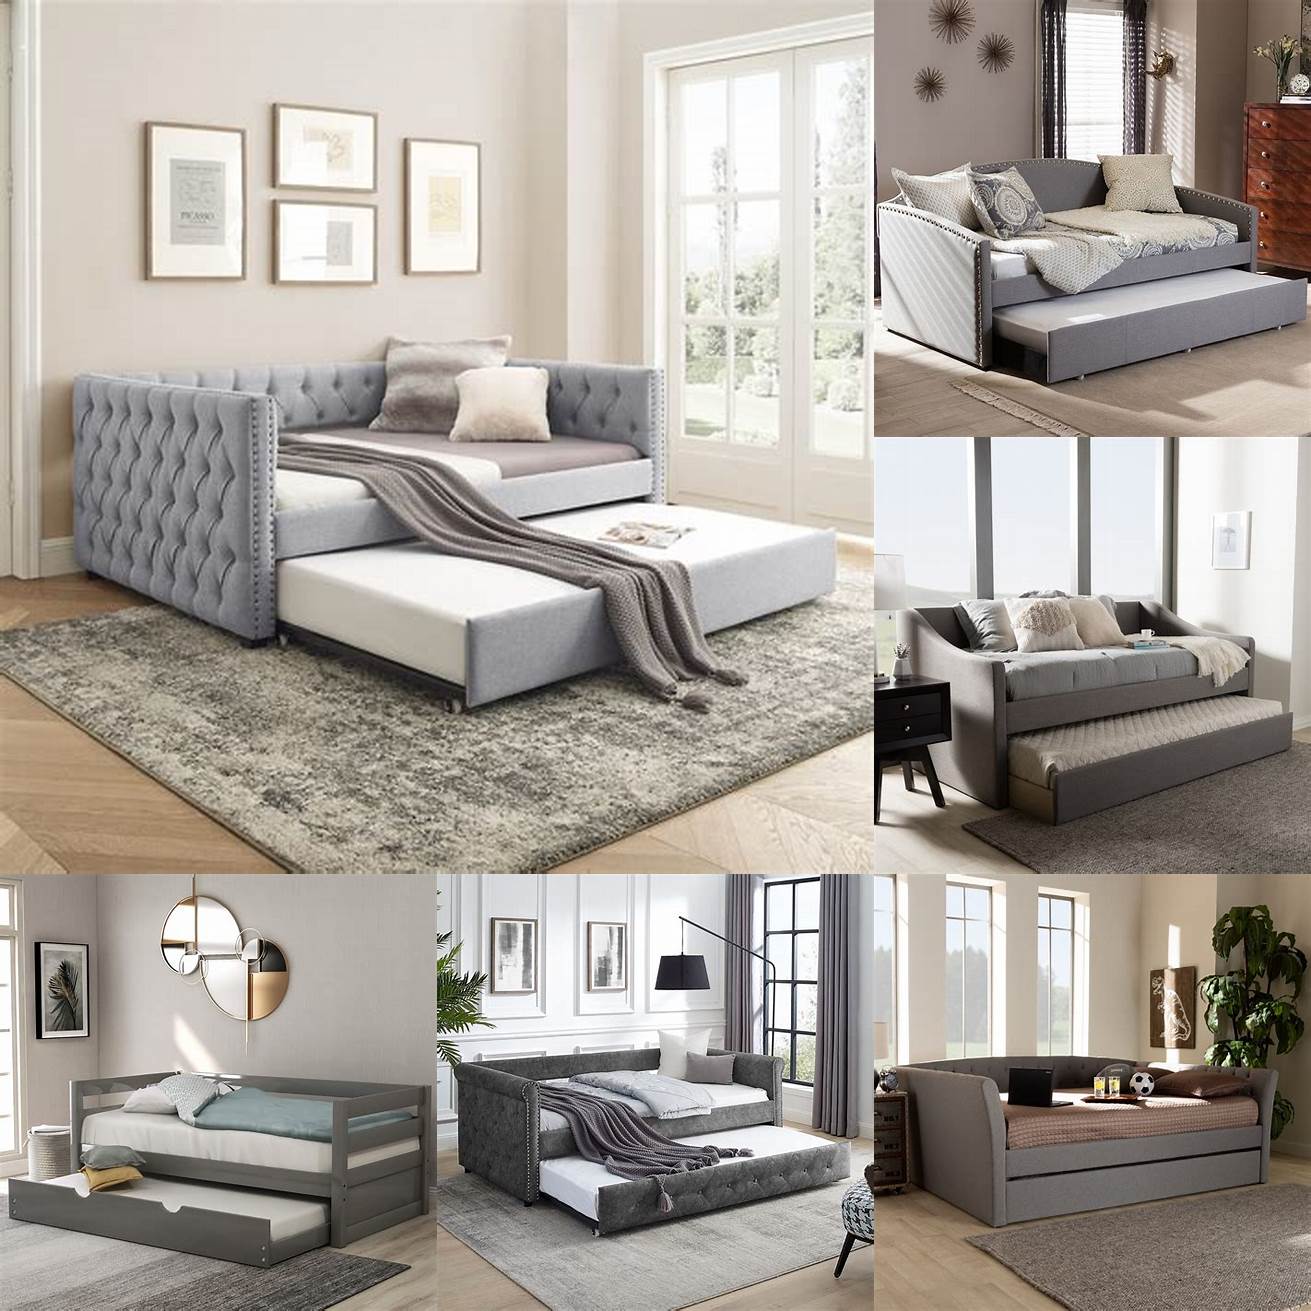 A sleek and modern grey trundle bed is perfect for a minimalist bedroom